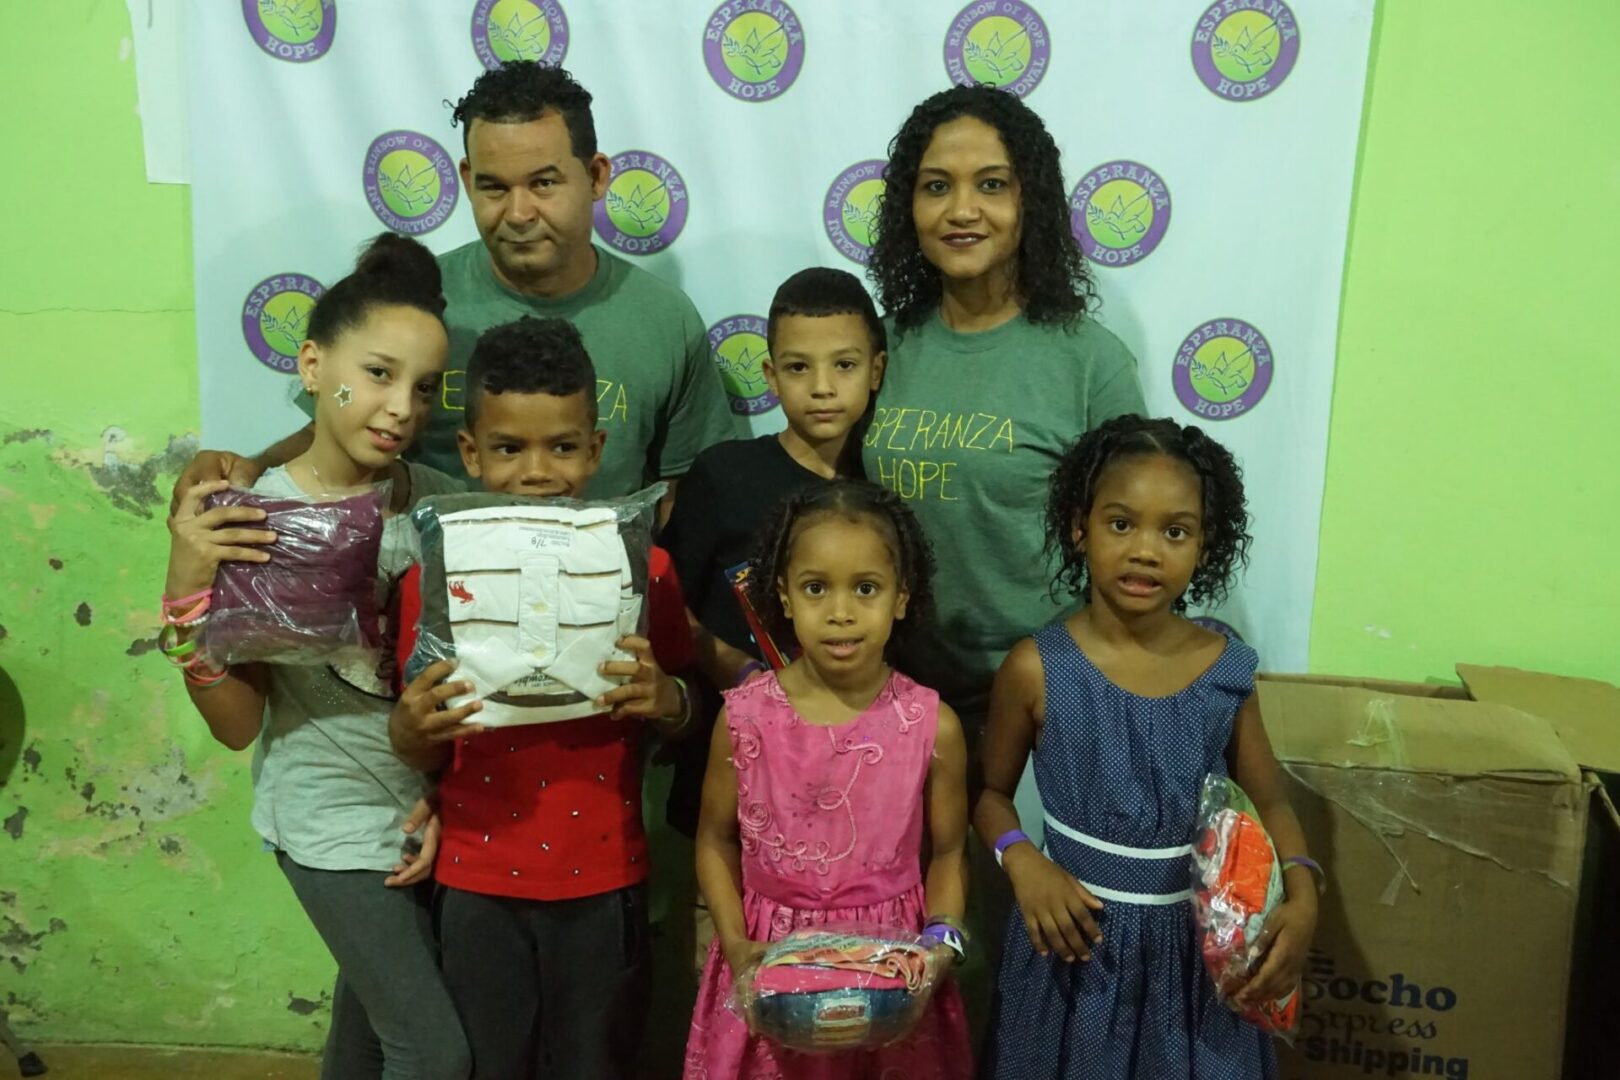 Two staff and a group of children holding toys, standing against a cloth with our logo